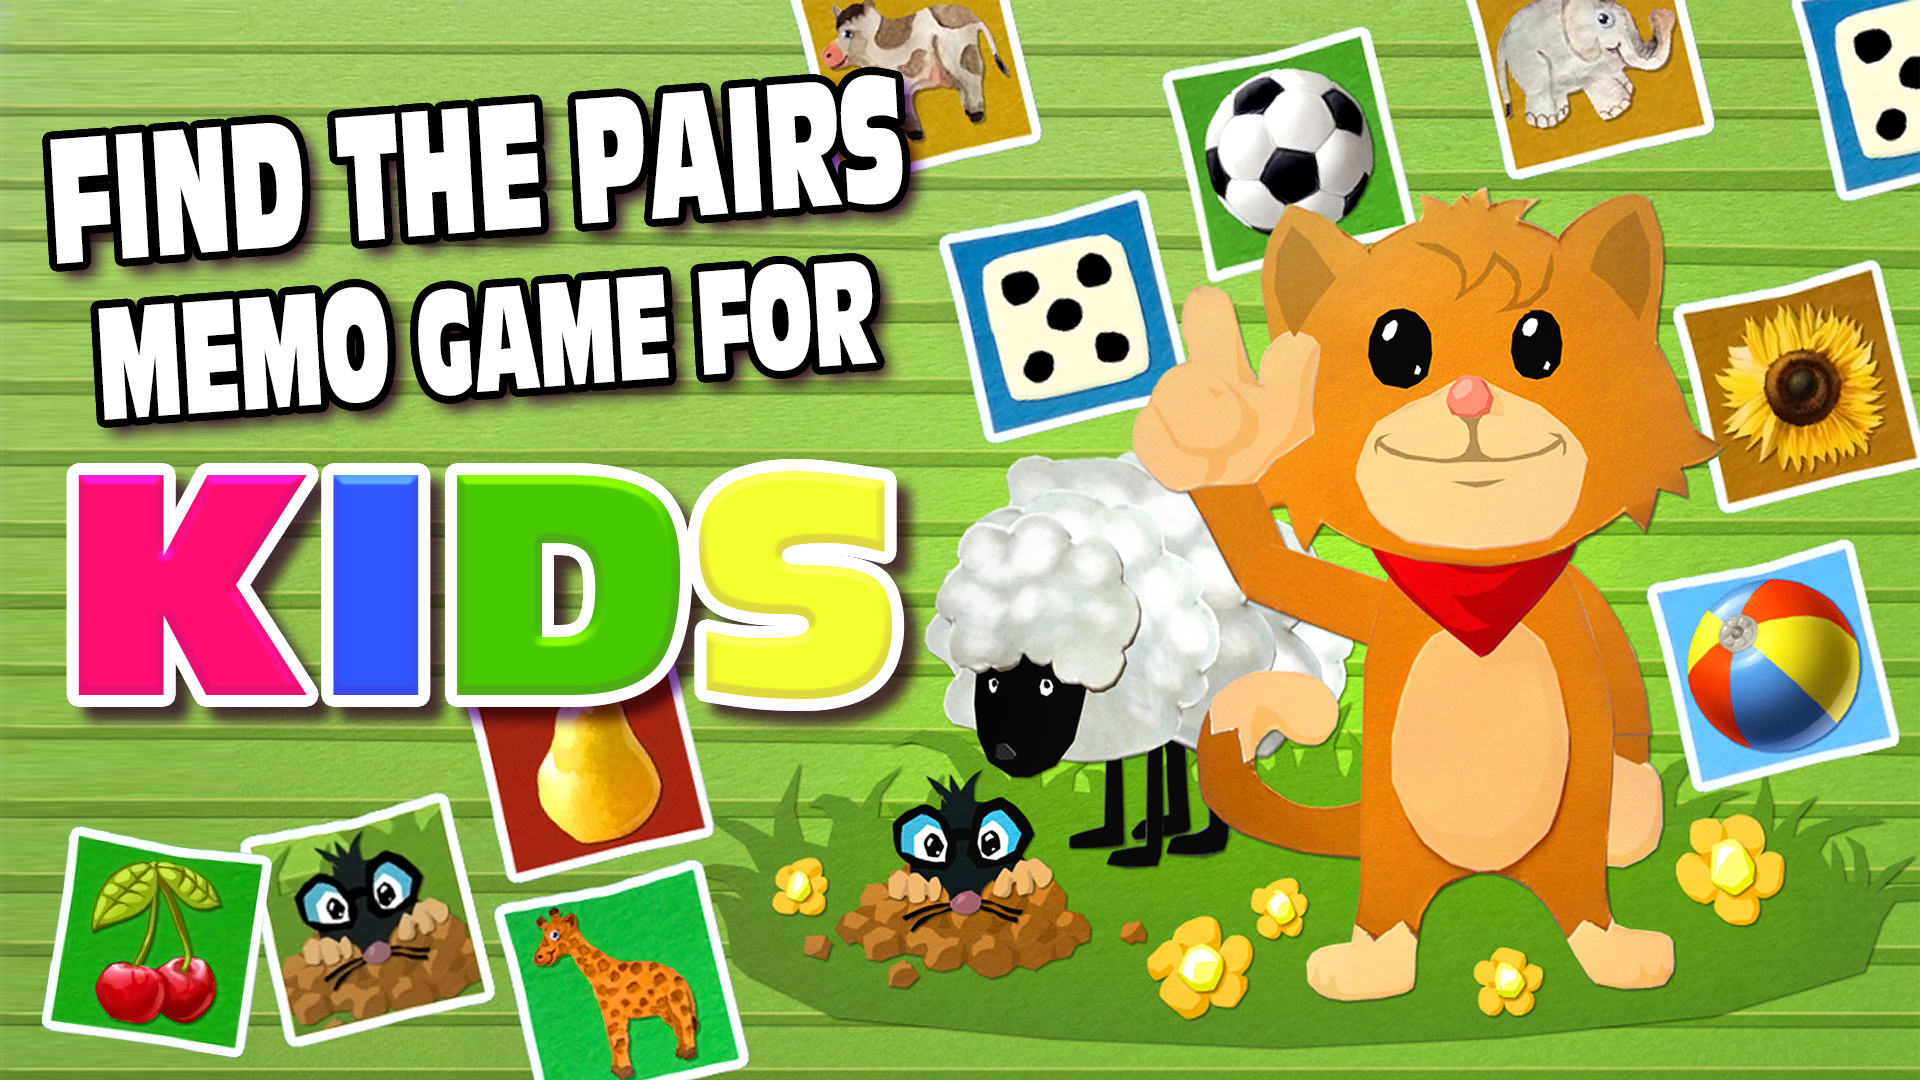 Find the Pairs Memo Game for Kids 1